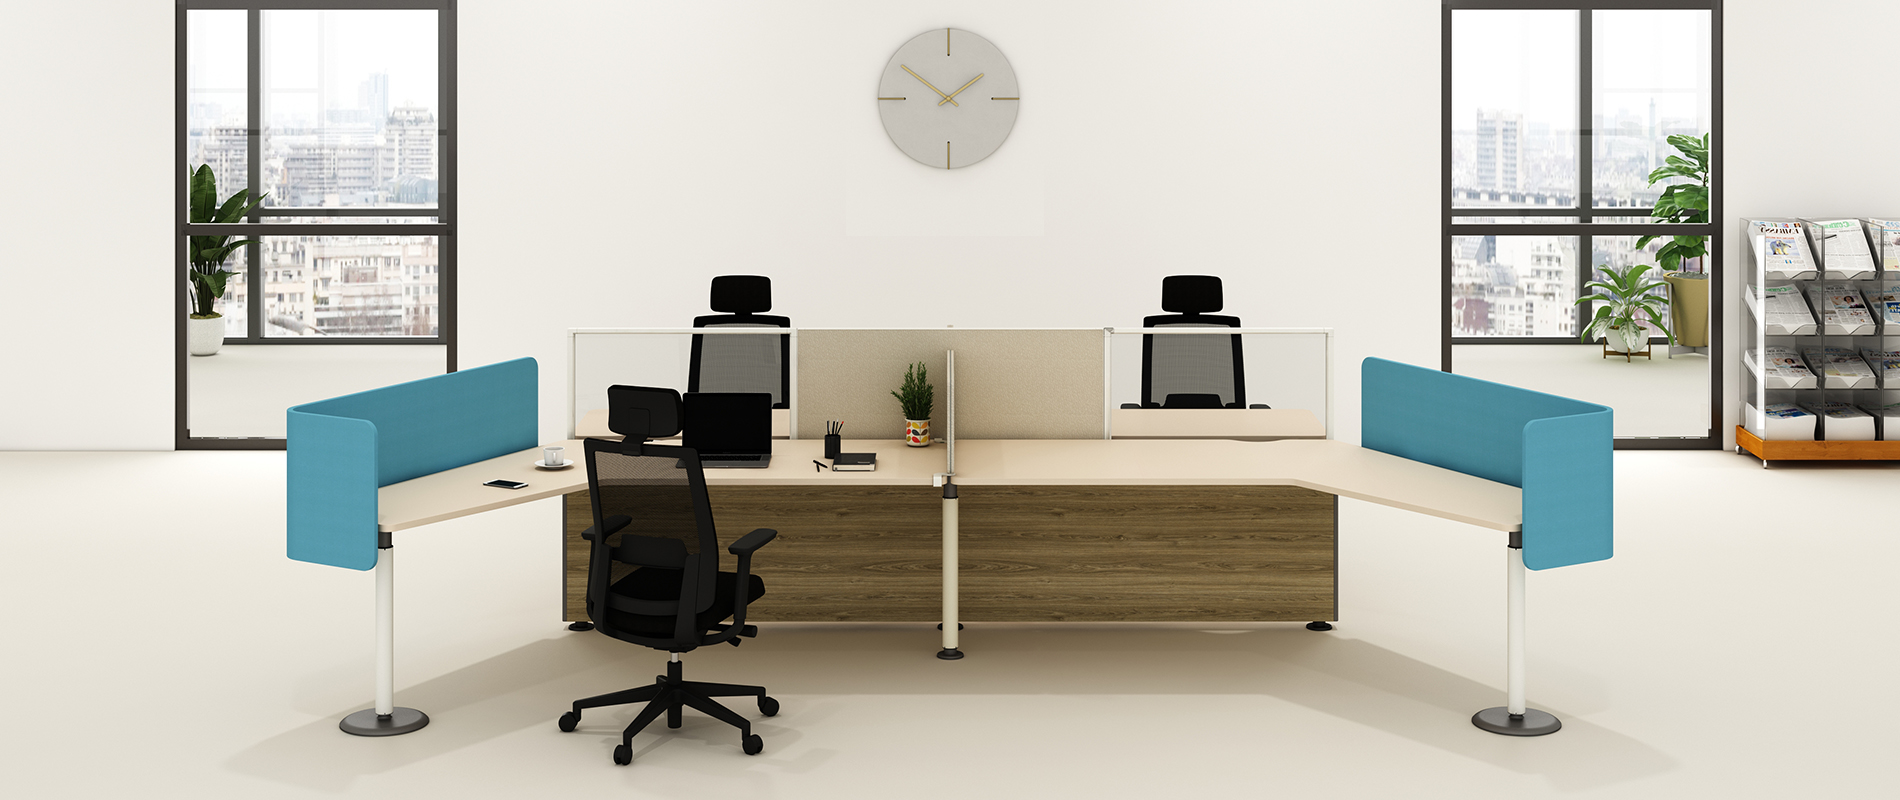 Add With Us Office Interior